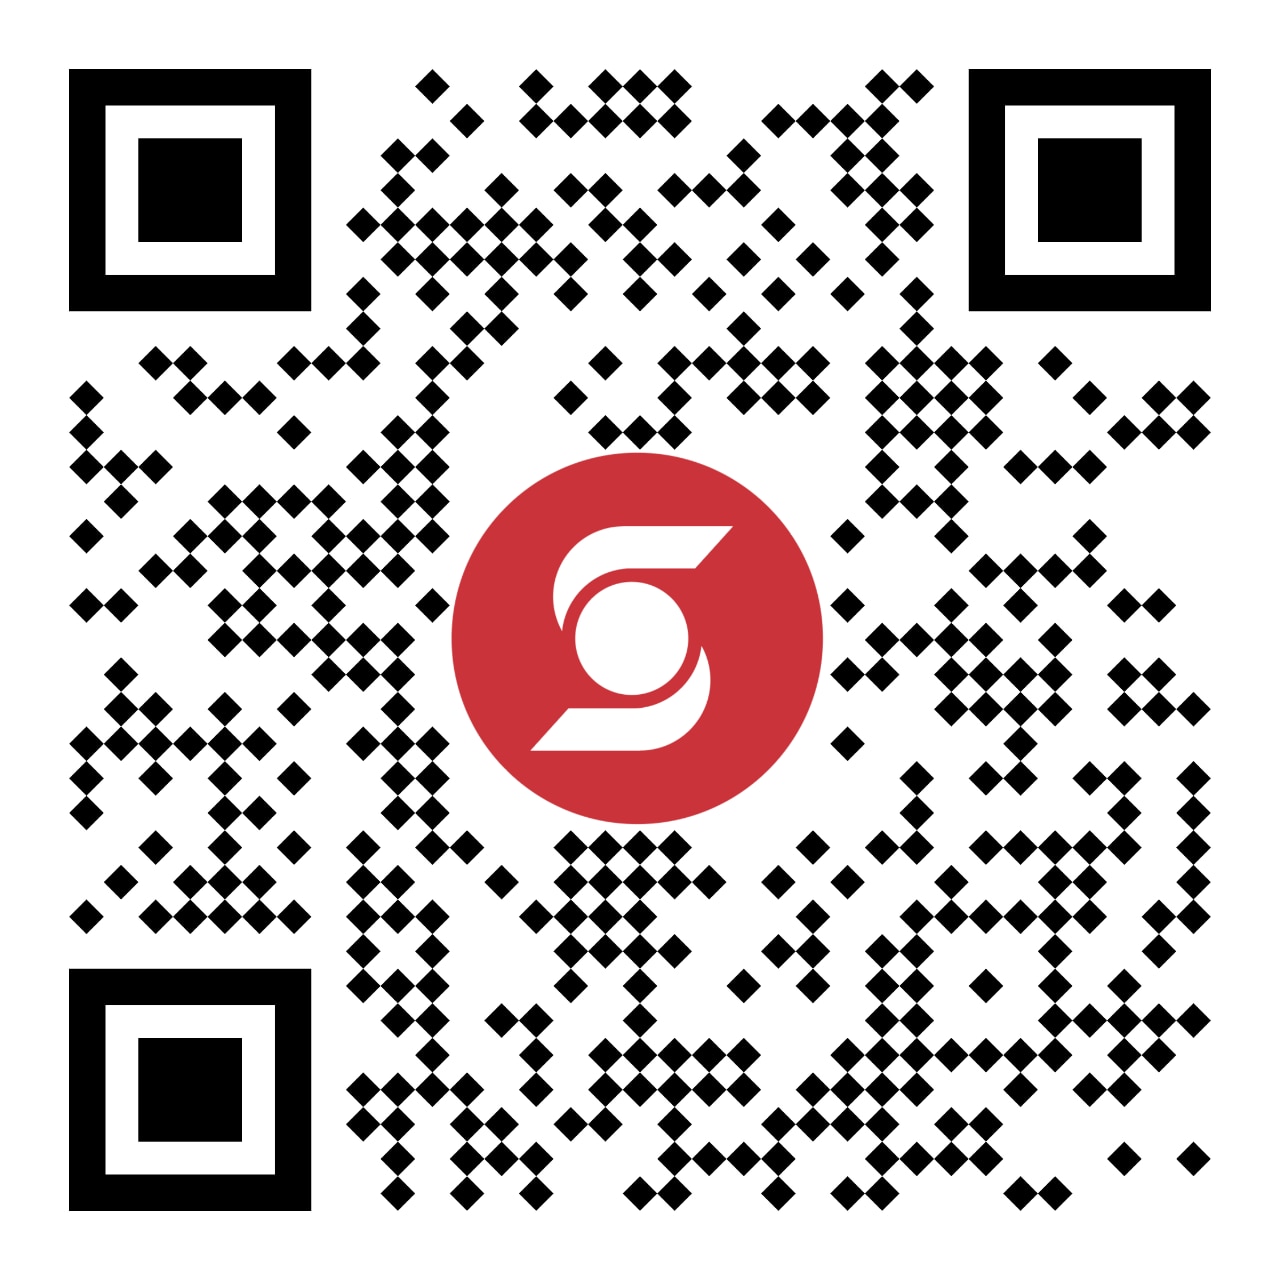 Scan the QR code and download our app today!